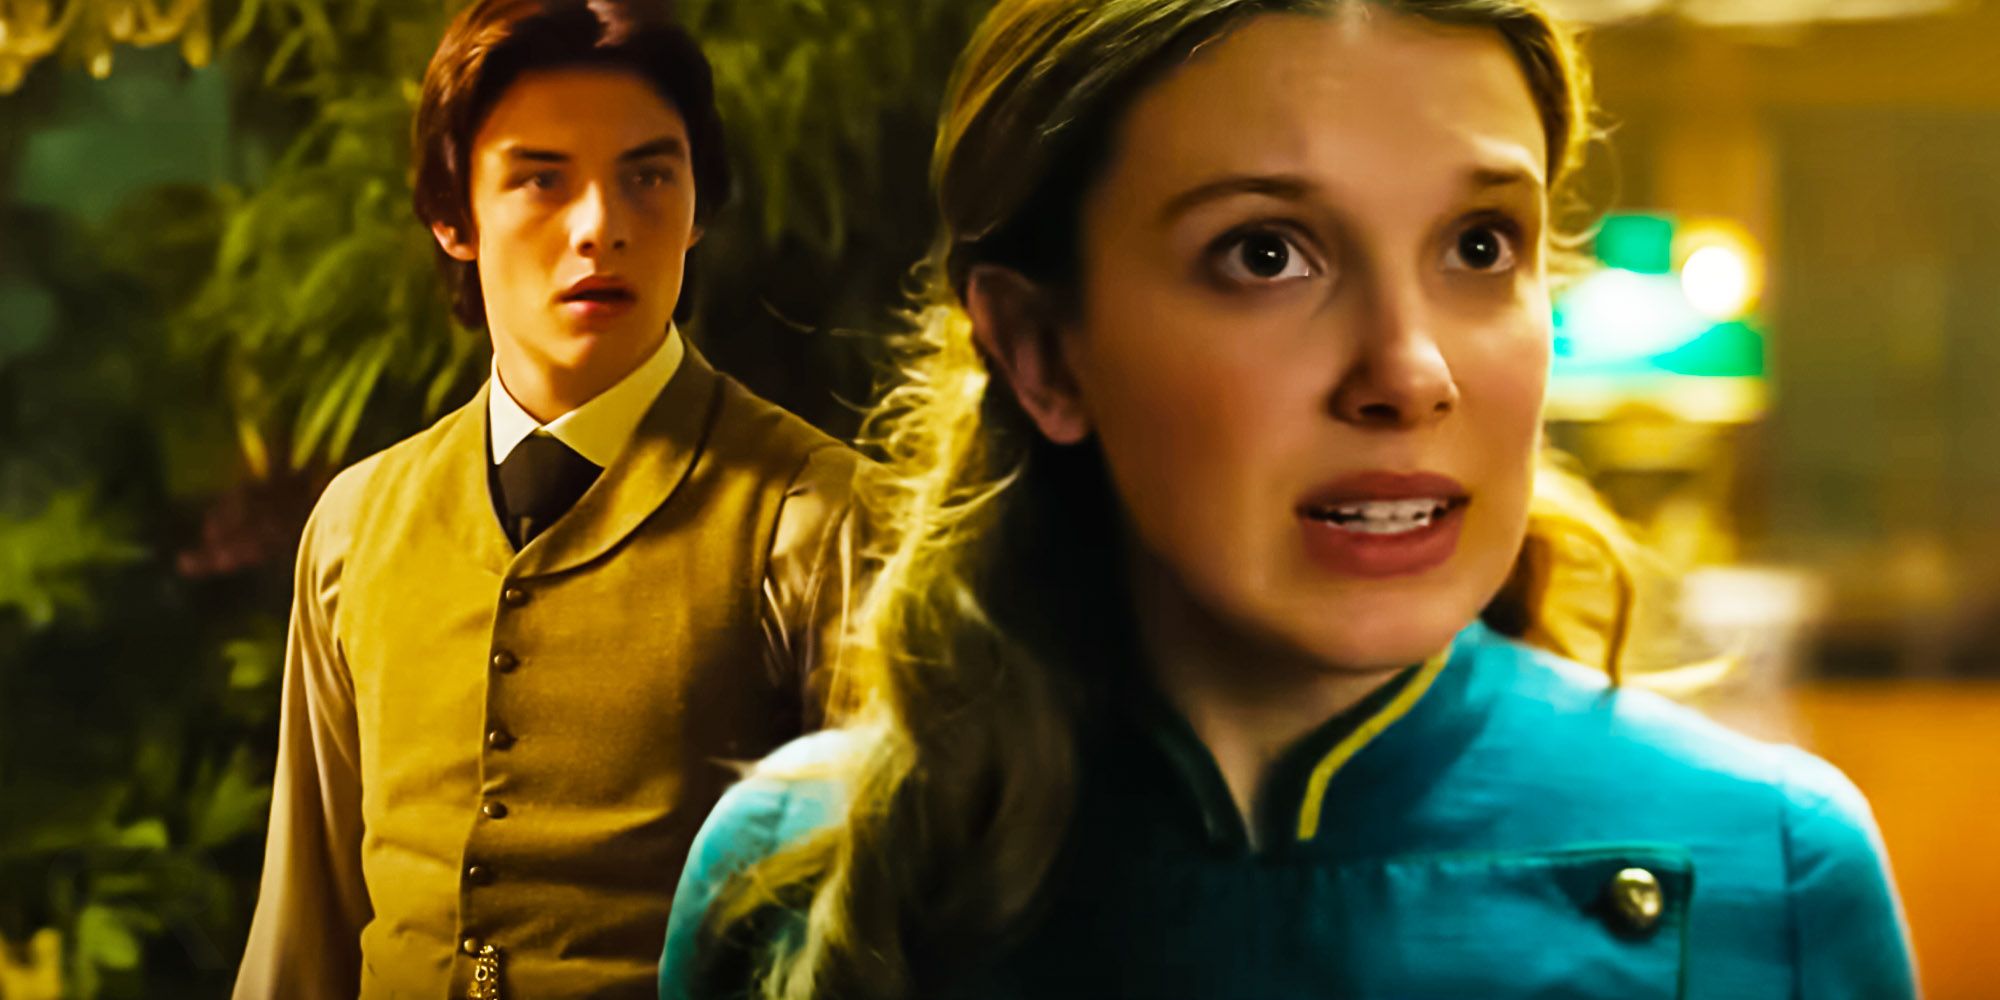 A collage of Enola Holmes and Tewkesbury (Millie Bobby brown and Louis Partridge, respectively) in Enola Holmes 2